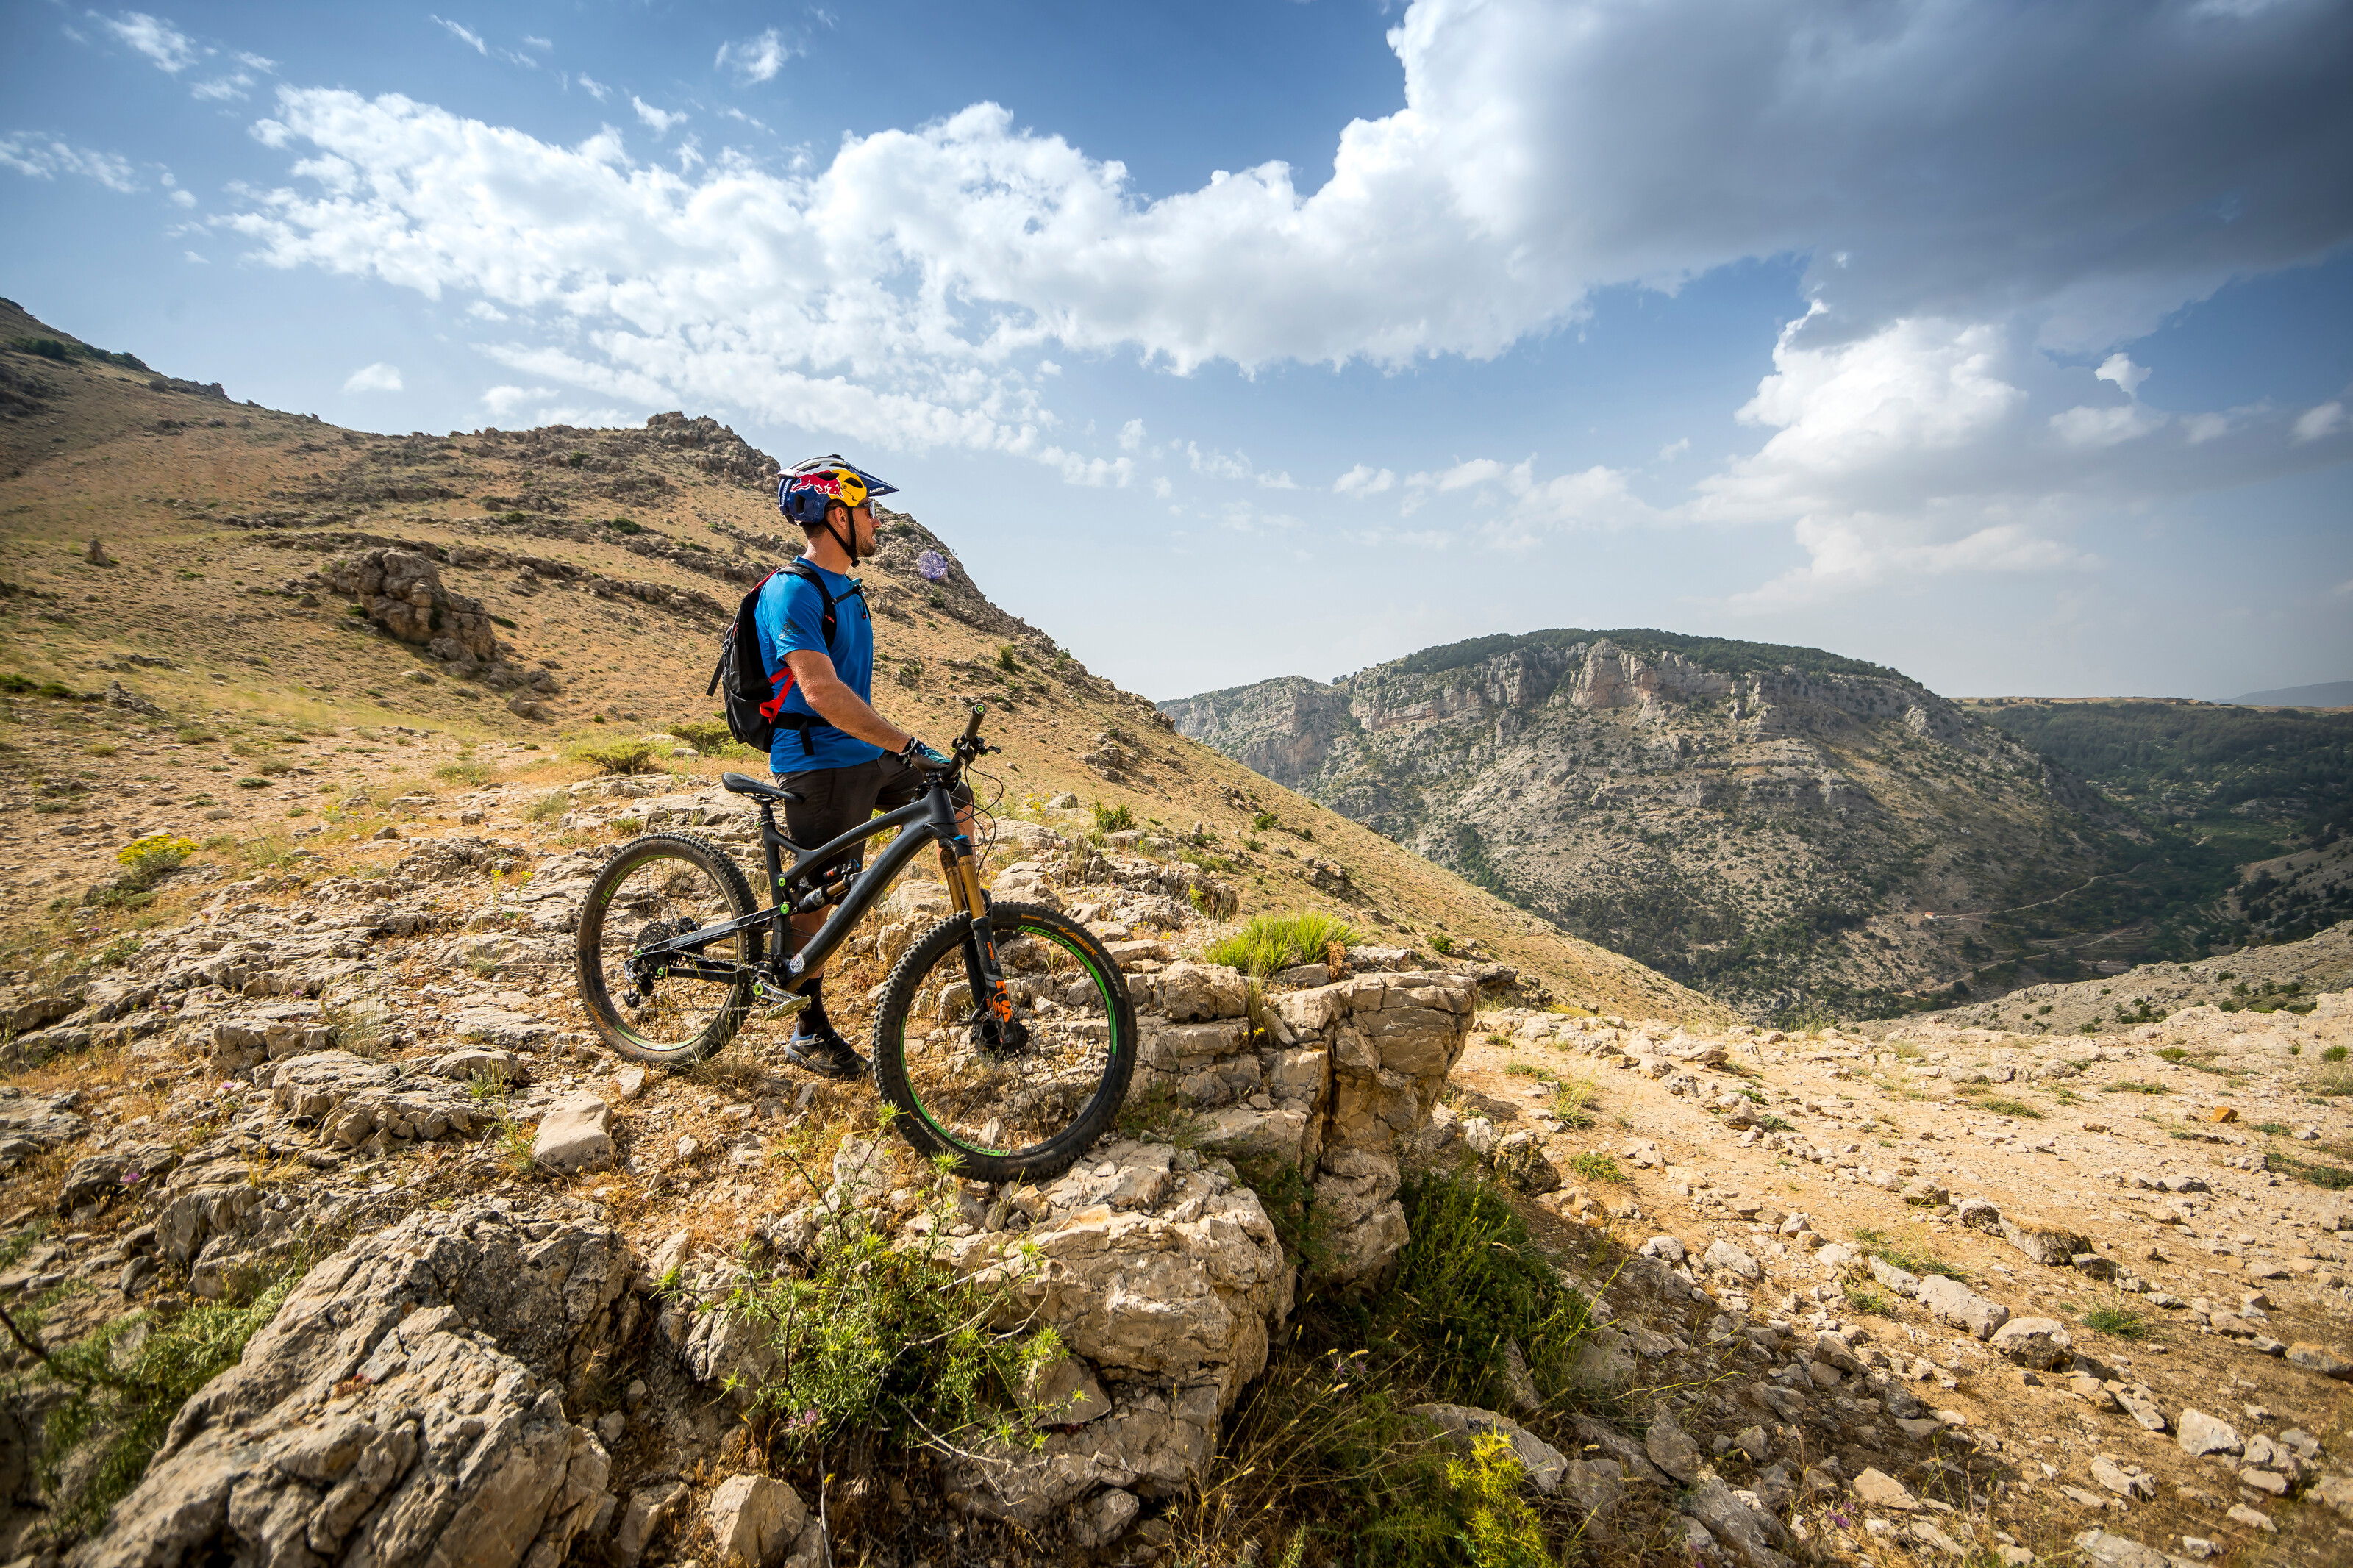 Kenny Belaey poses during filming Border to Border in Tannourine, Lebanon
Credit: Christophe Akiki/Red Bull Content PoolAppreciating the wonder